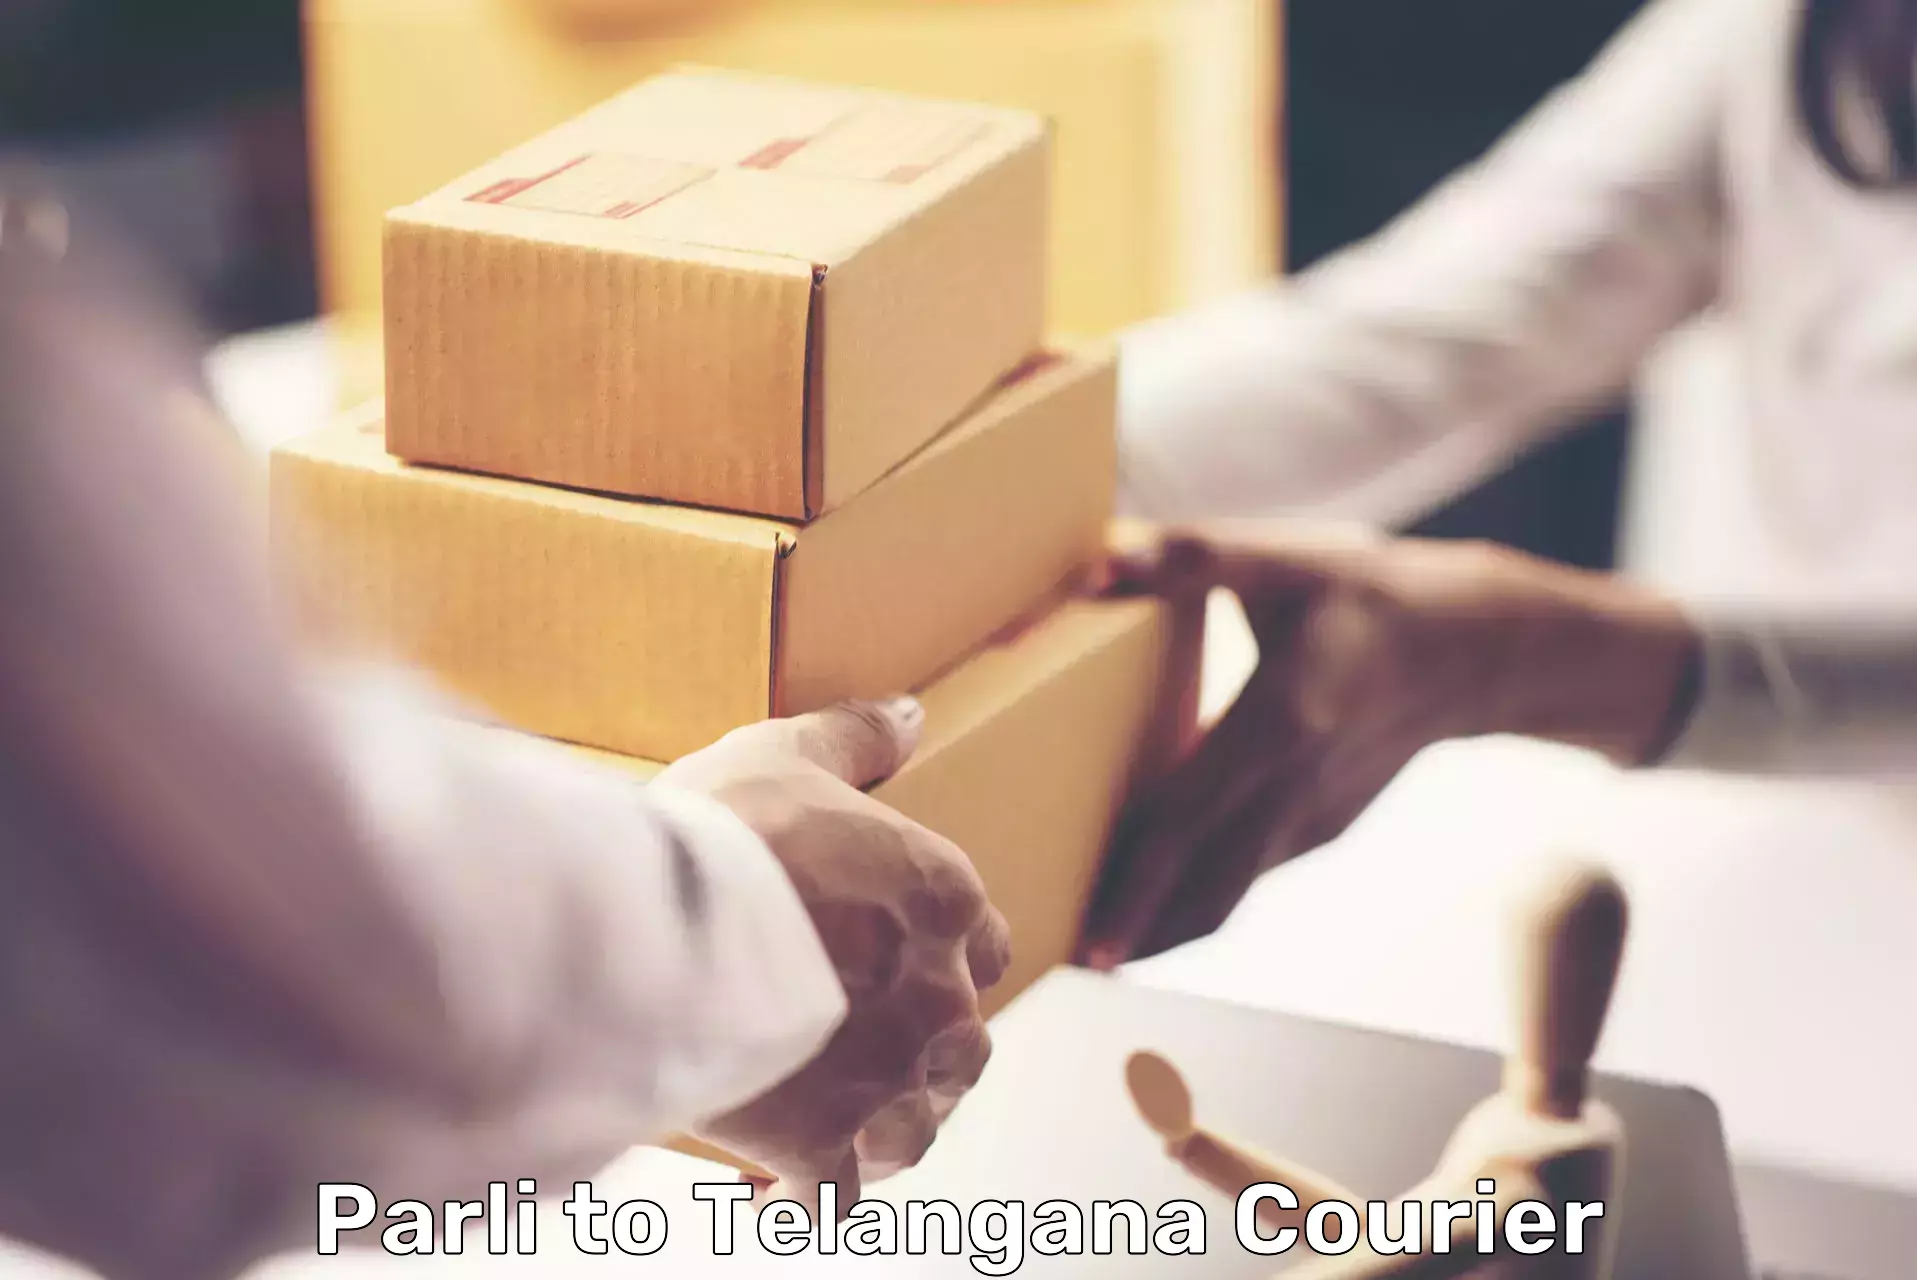 Customer-focused courier in Parli to Netrang